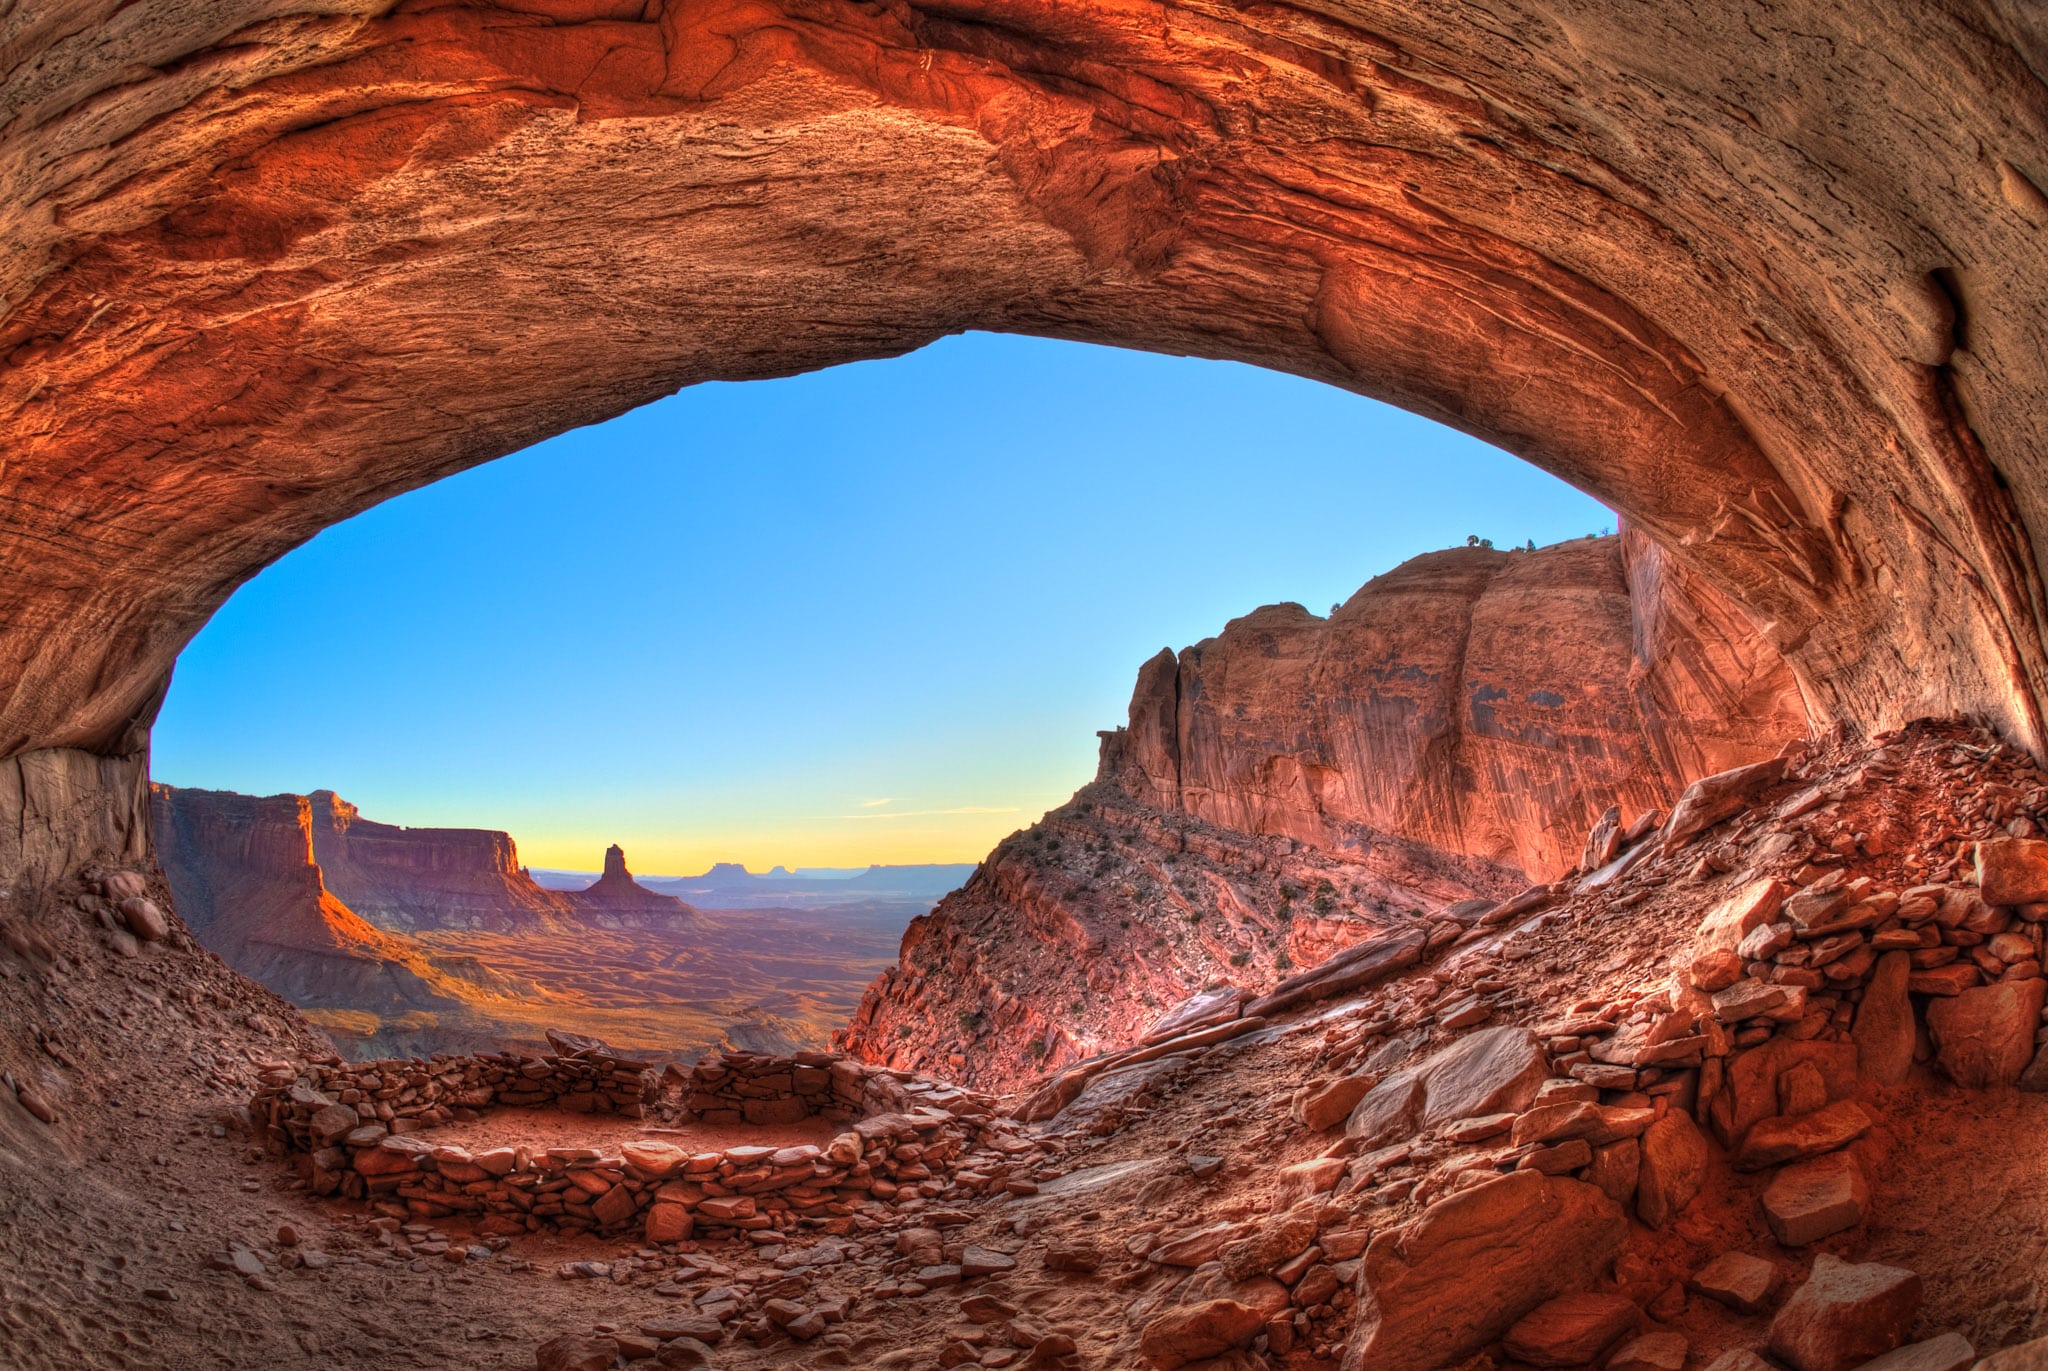 Looking south at sunset from the alcove of False Kiva in Canyonlands National Park, near Moab, Utah.